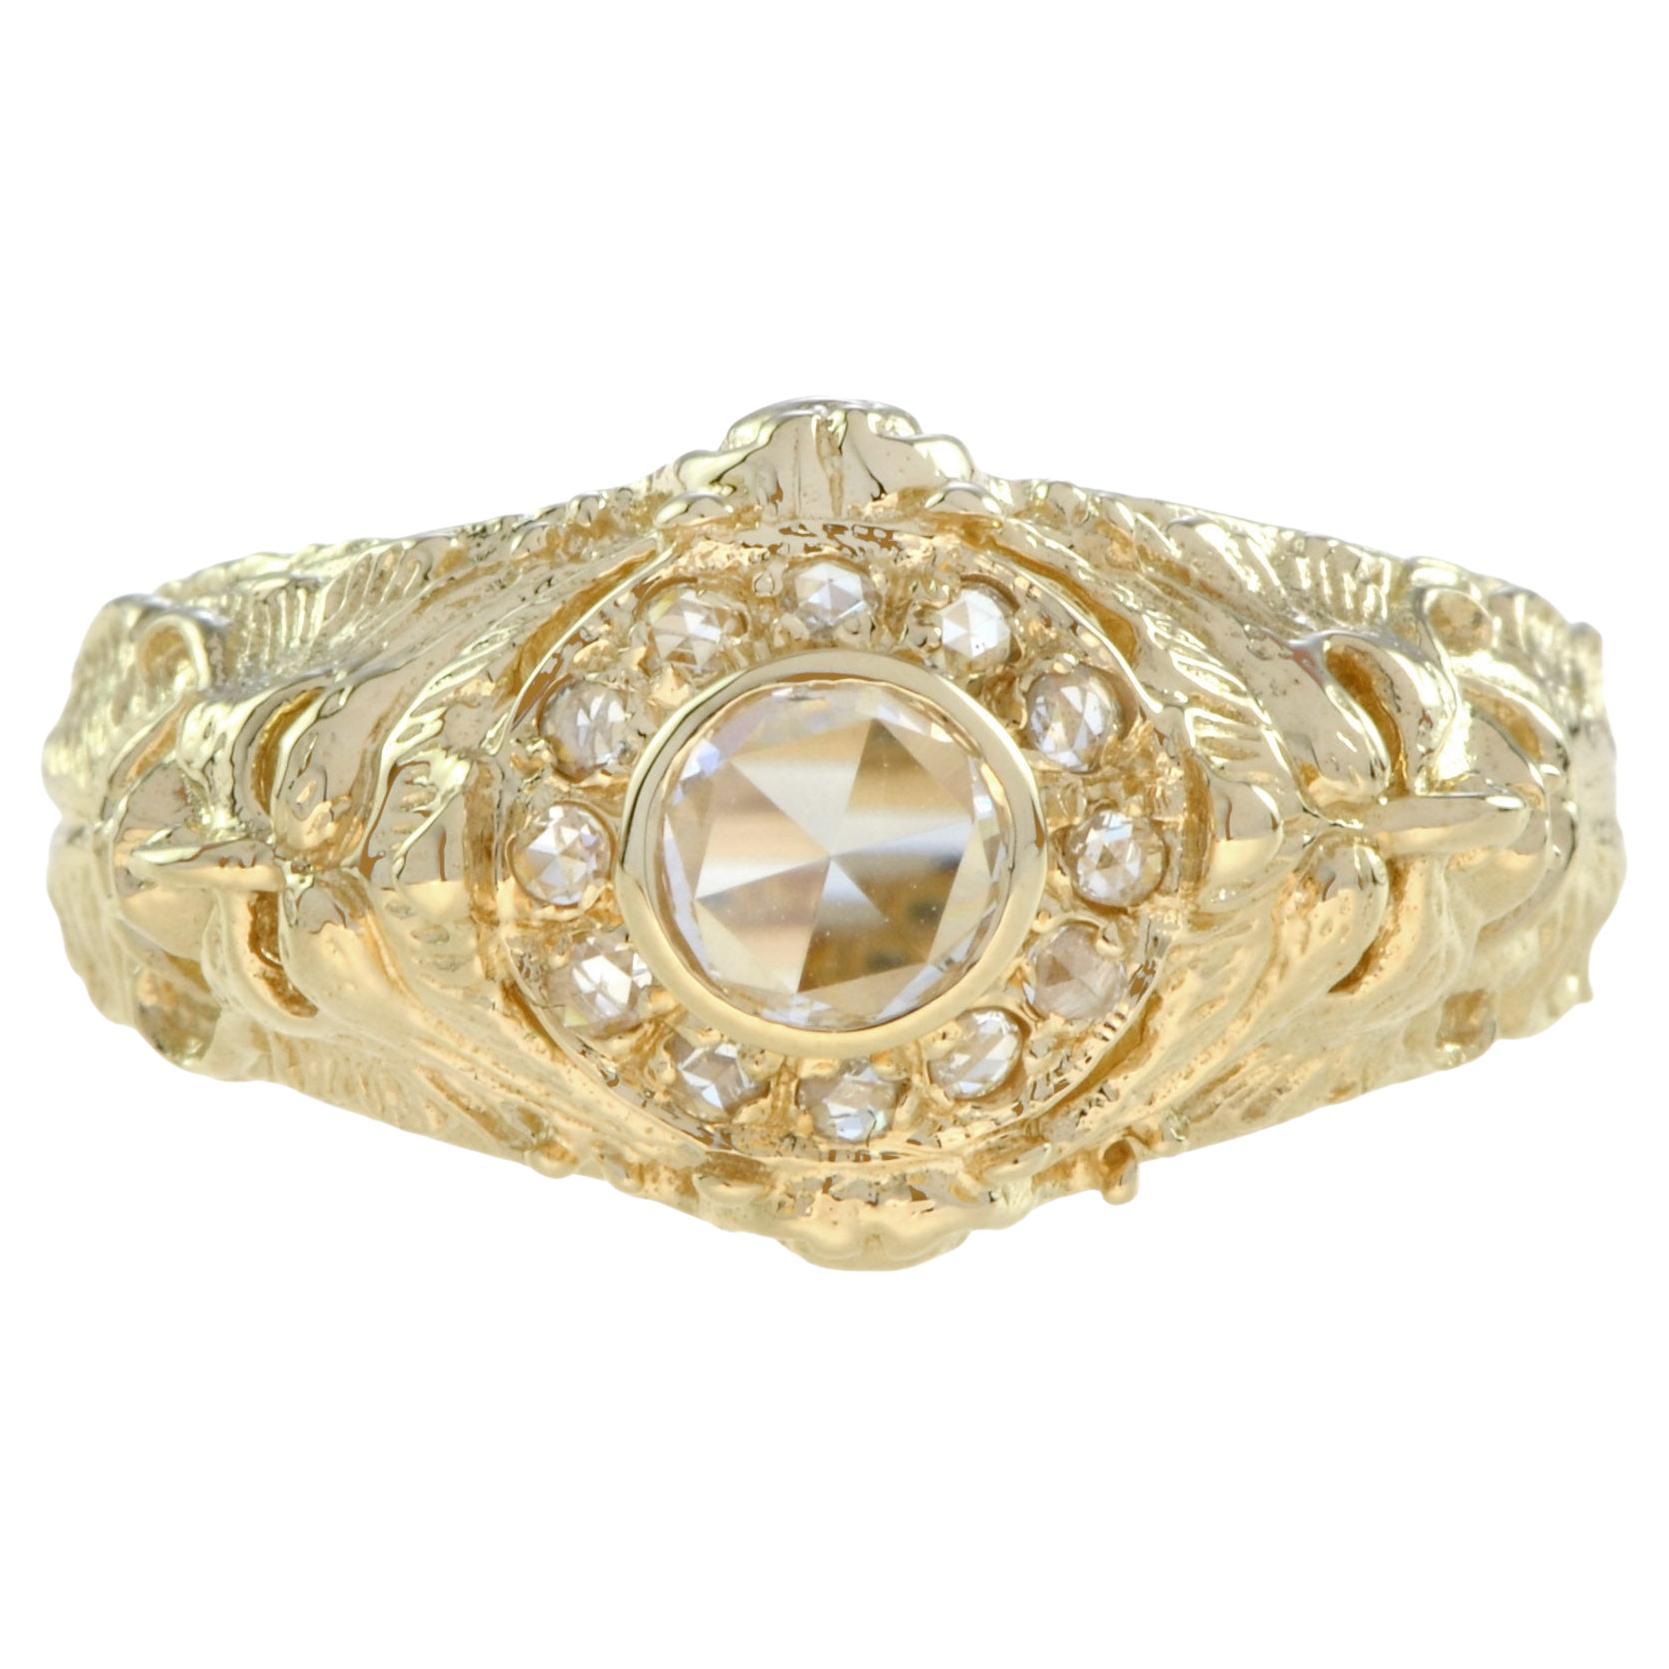 Antique Style Old Cut Diamond Dome Ring in 10K Yellow Gold